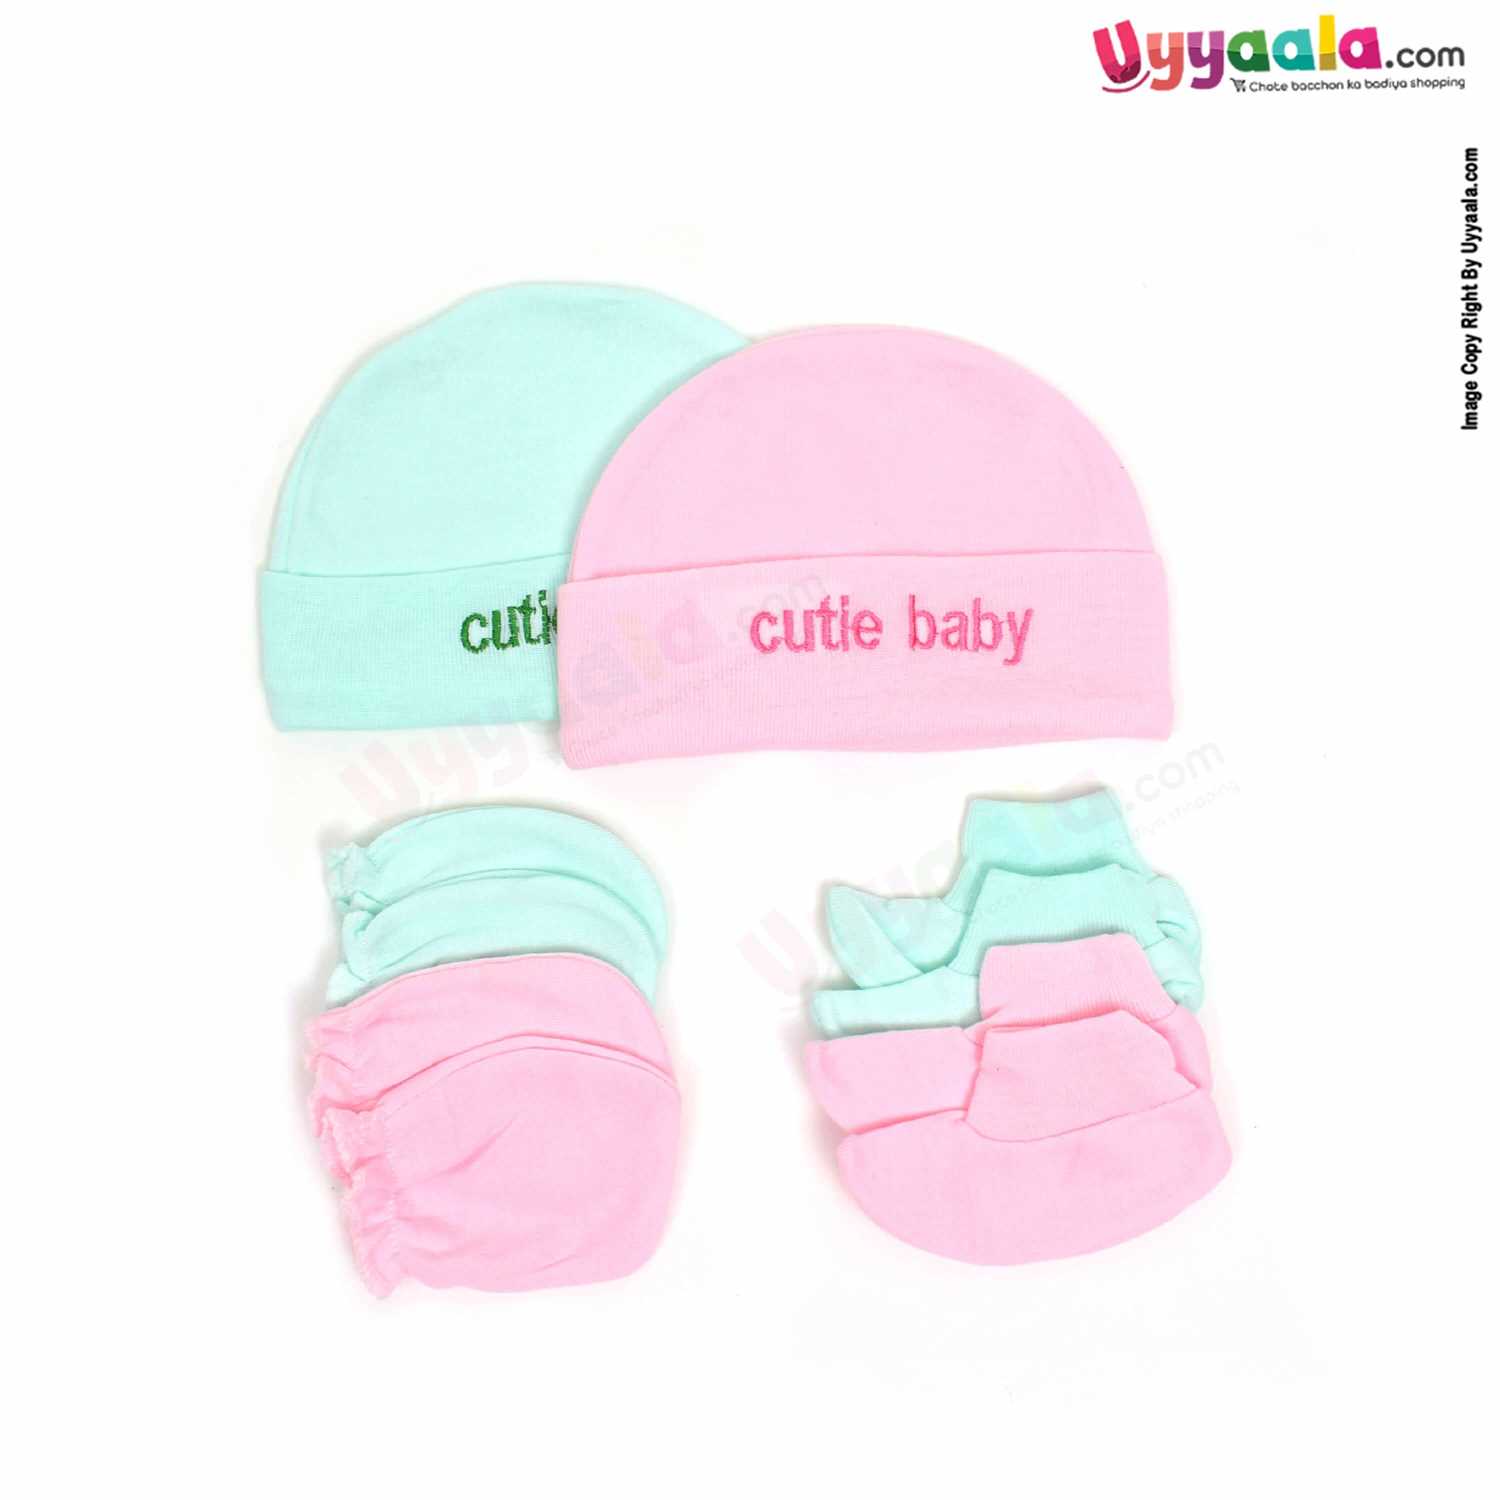 MONTALY Premium Quality Soft Hosiery Cotton Mitten, Booty & Cap Set for Babies Pack of 2 ,0-3m Age- Green & Pink